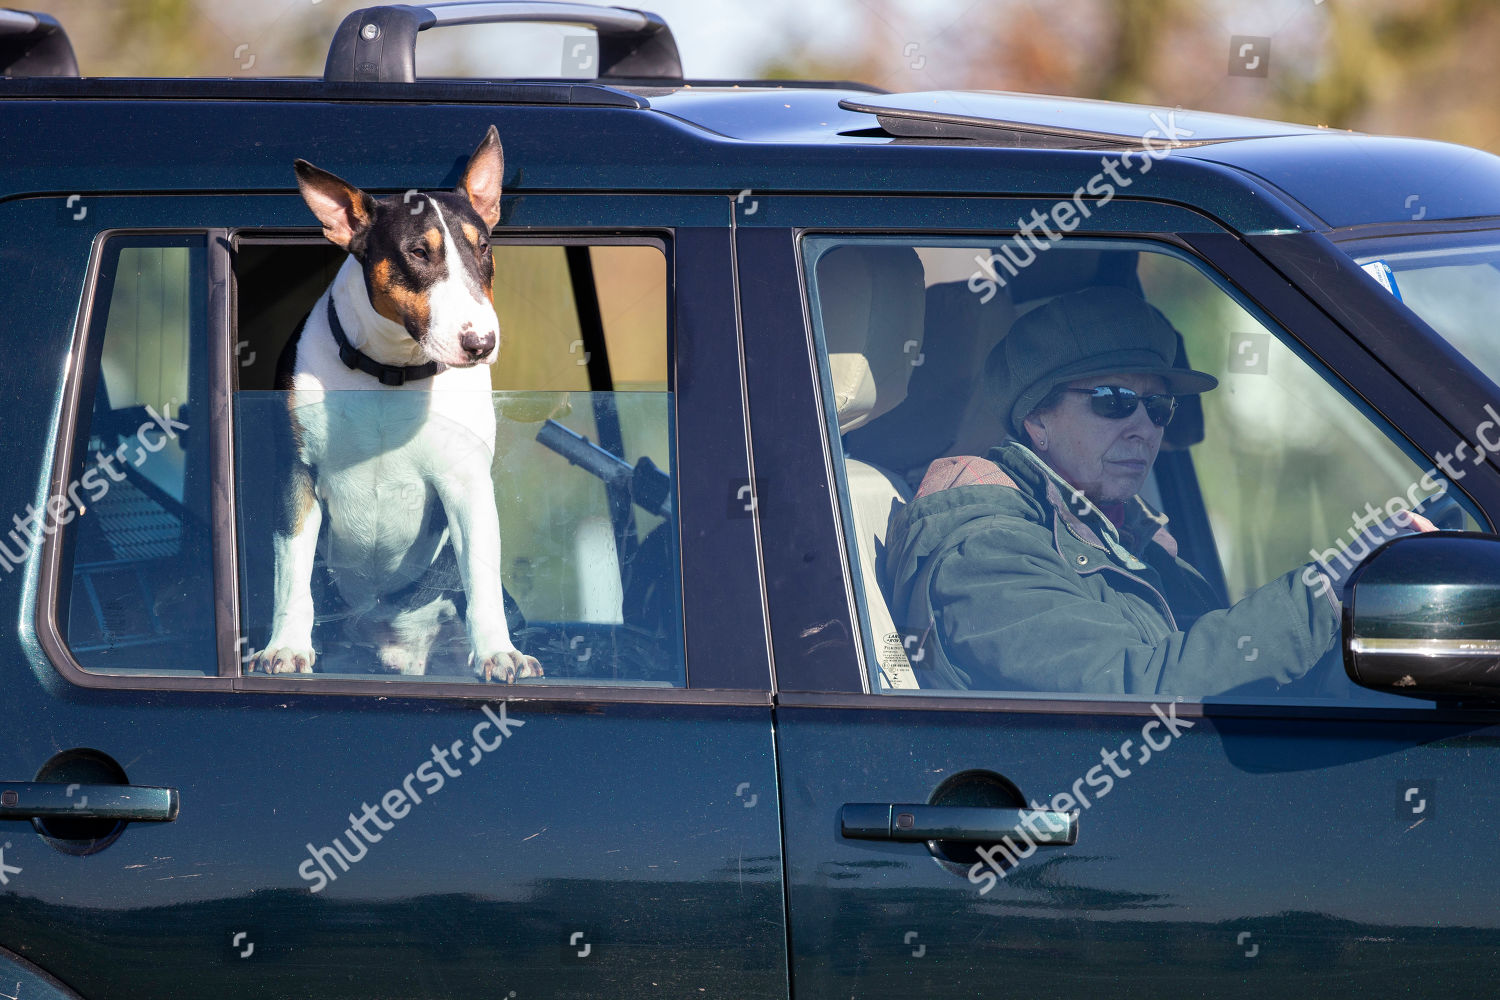 the-landrover-horse-trials-gatcombe-park-gloucestershire-uk-shutterstock-editorial-10165571ab.jpg